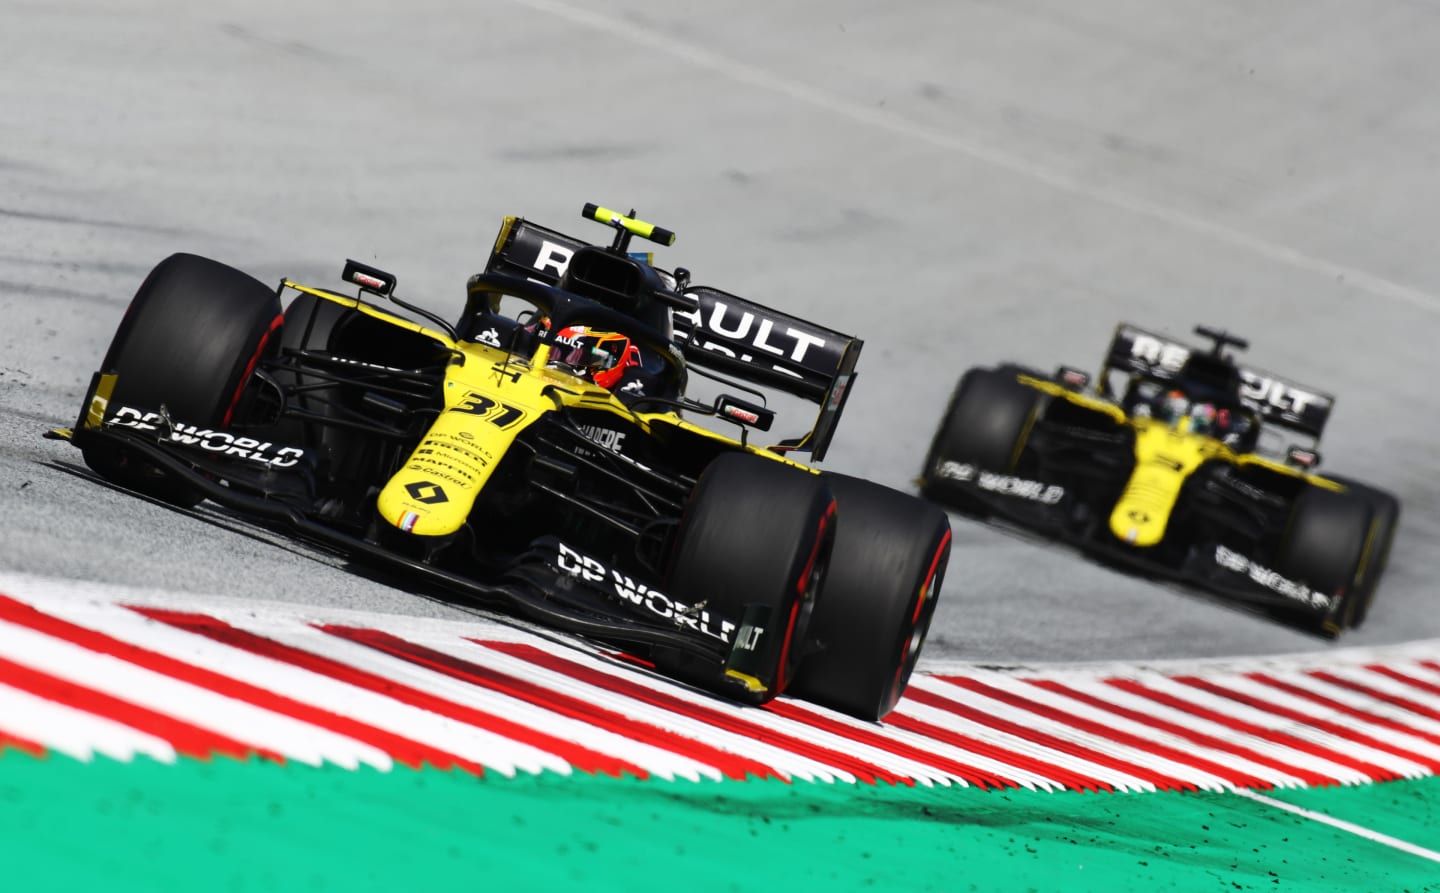 SPIELBERG, AUSTRIA - JULY 12: Esteban Ocon of France driving the (31) Renault Sport Formula One Team RS20 leads Daniel Ricciardo of Australia driving the (3) Renault Sport Formula One Team RS20 on track during the Formula One Grand Prix of Styria at Red Bull Ring on July 12, 2020 in Spielberg, Austria. (Photo by Mark Thompson/Getty Images)